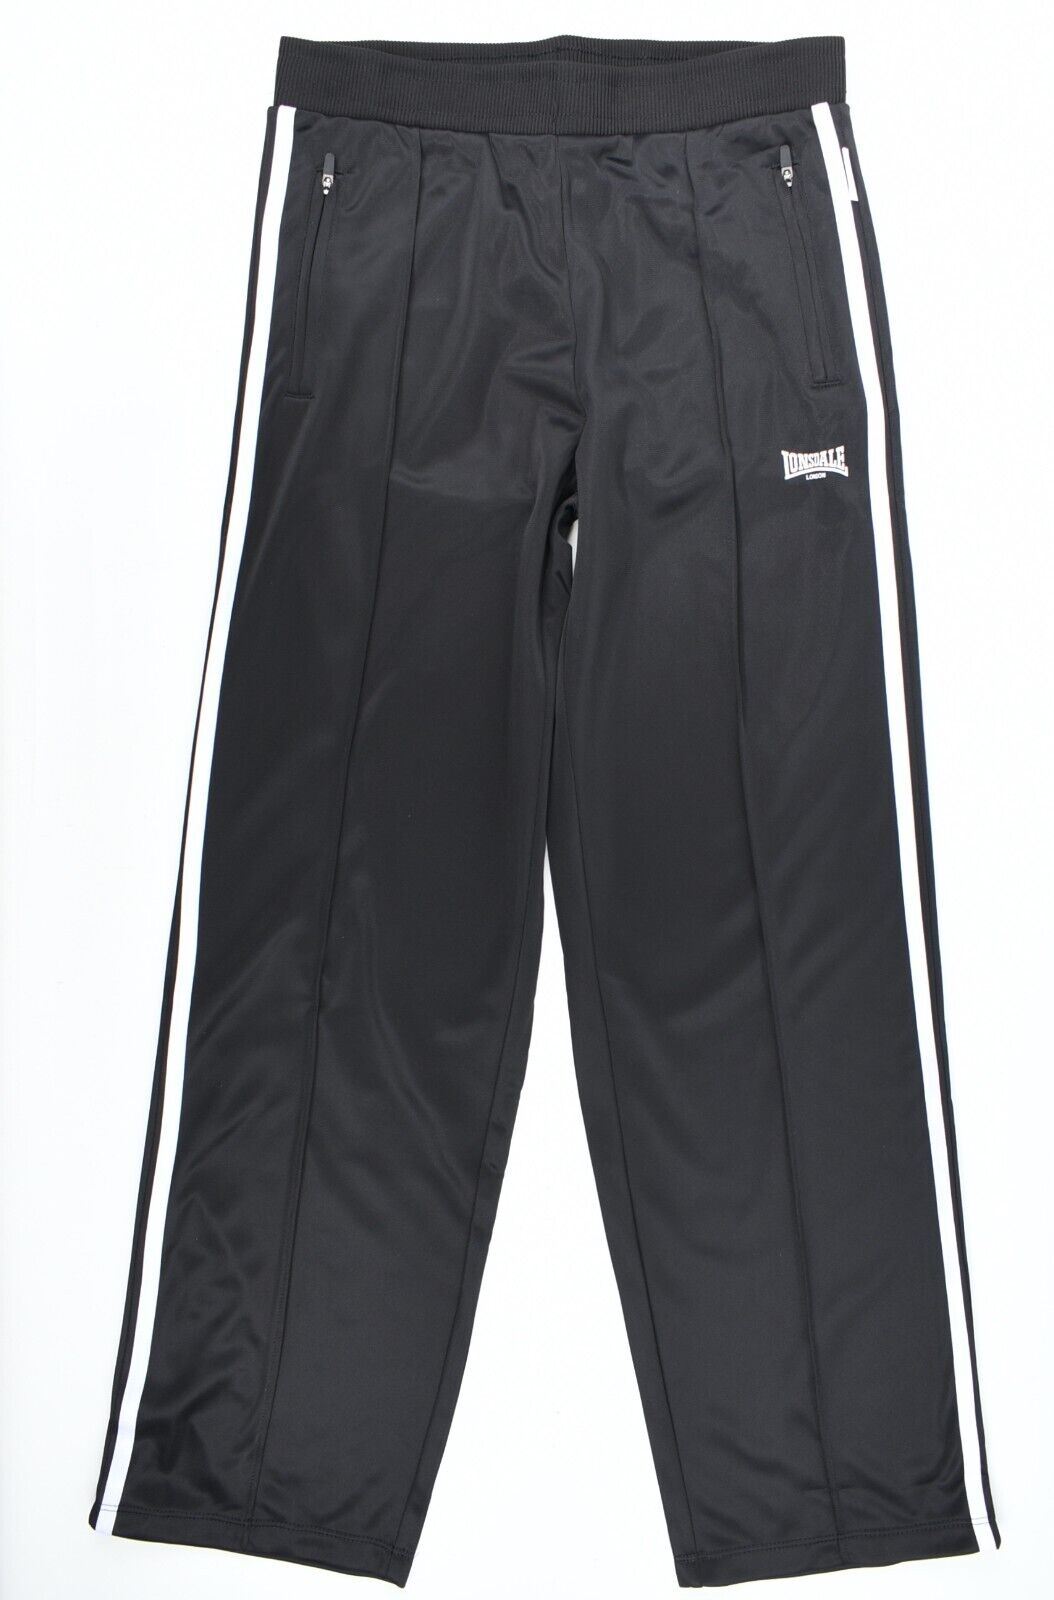 LONSDALE Girls Kids Track Pants, Joggers, Black/White, size 13 years